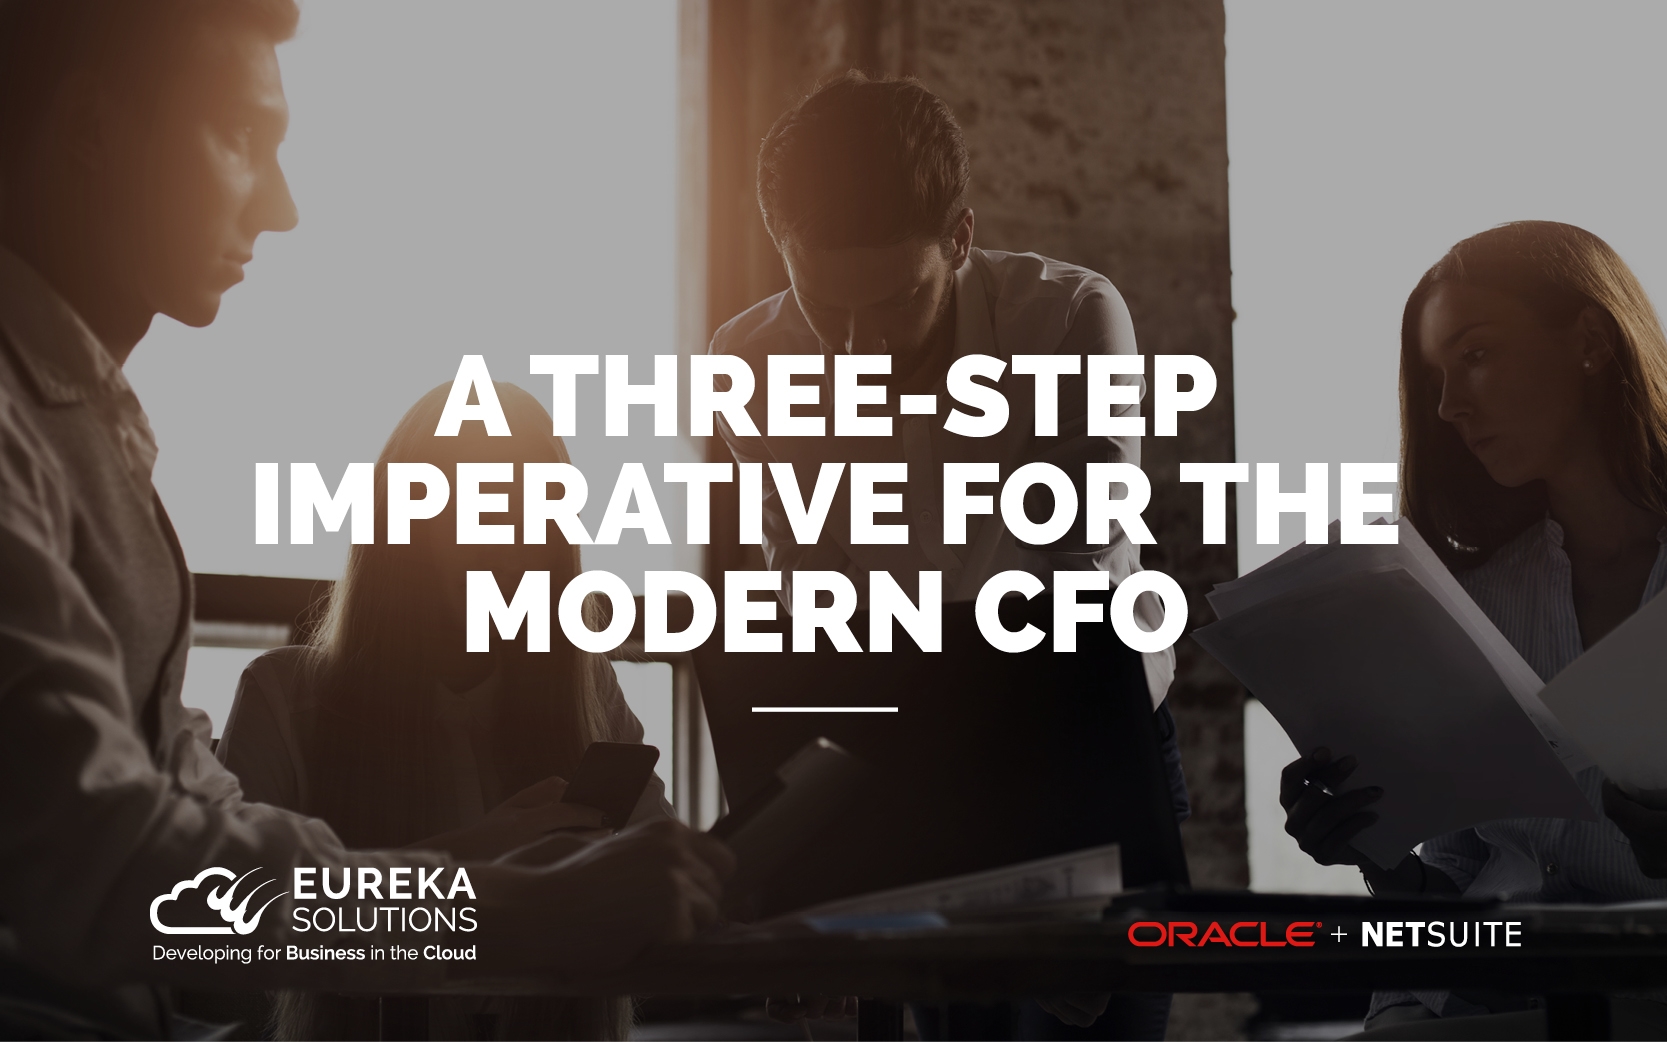 Lead, Transform, Operate: A 3-Step Imperative for the Modern CFO